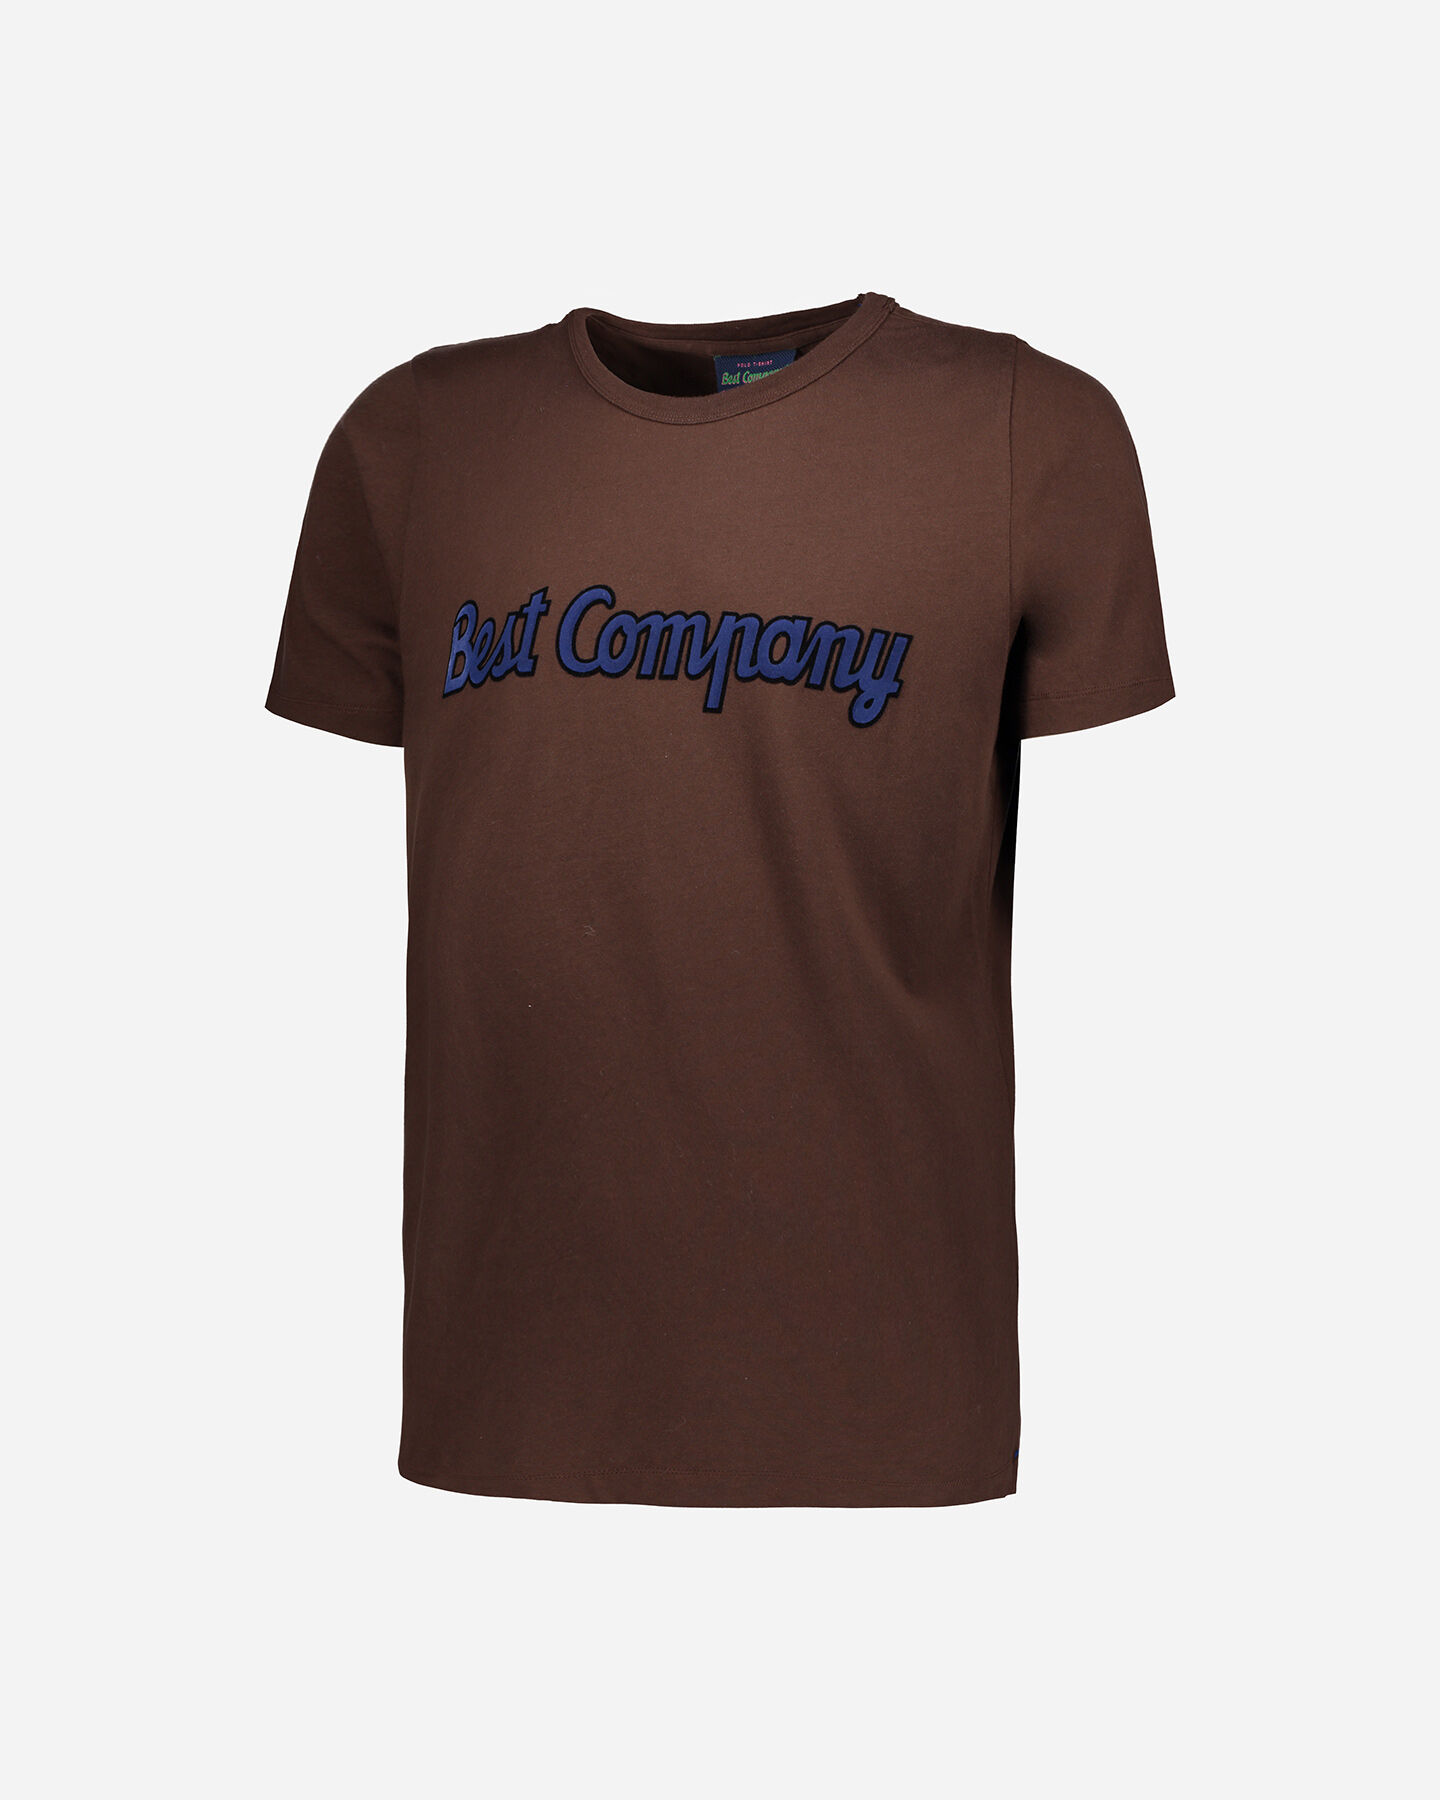  T-Shirt BEST COMPANY LOGO M S4070859|0103|S scatto 0